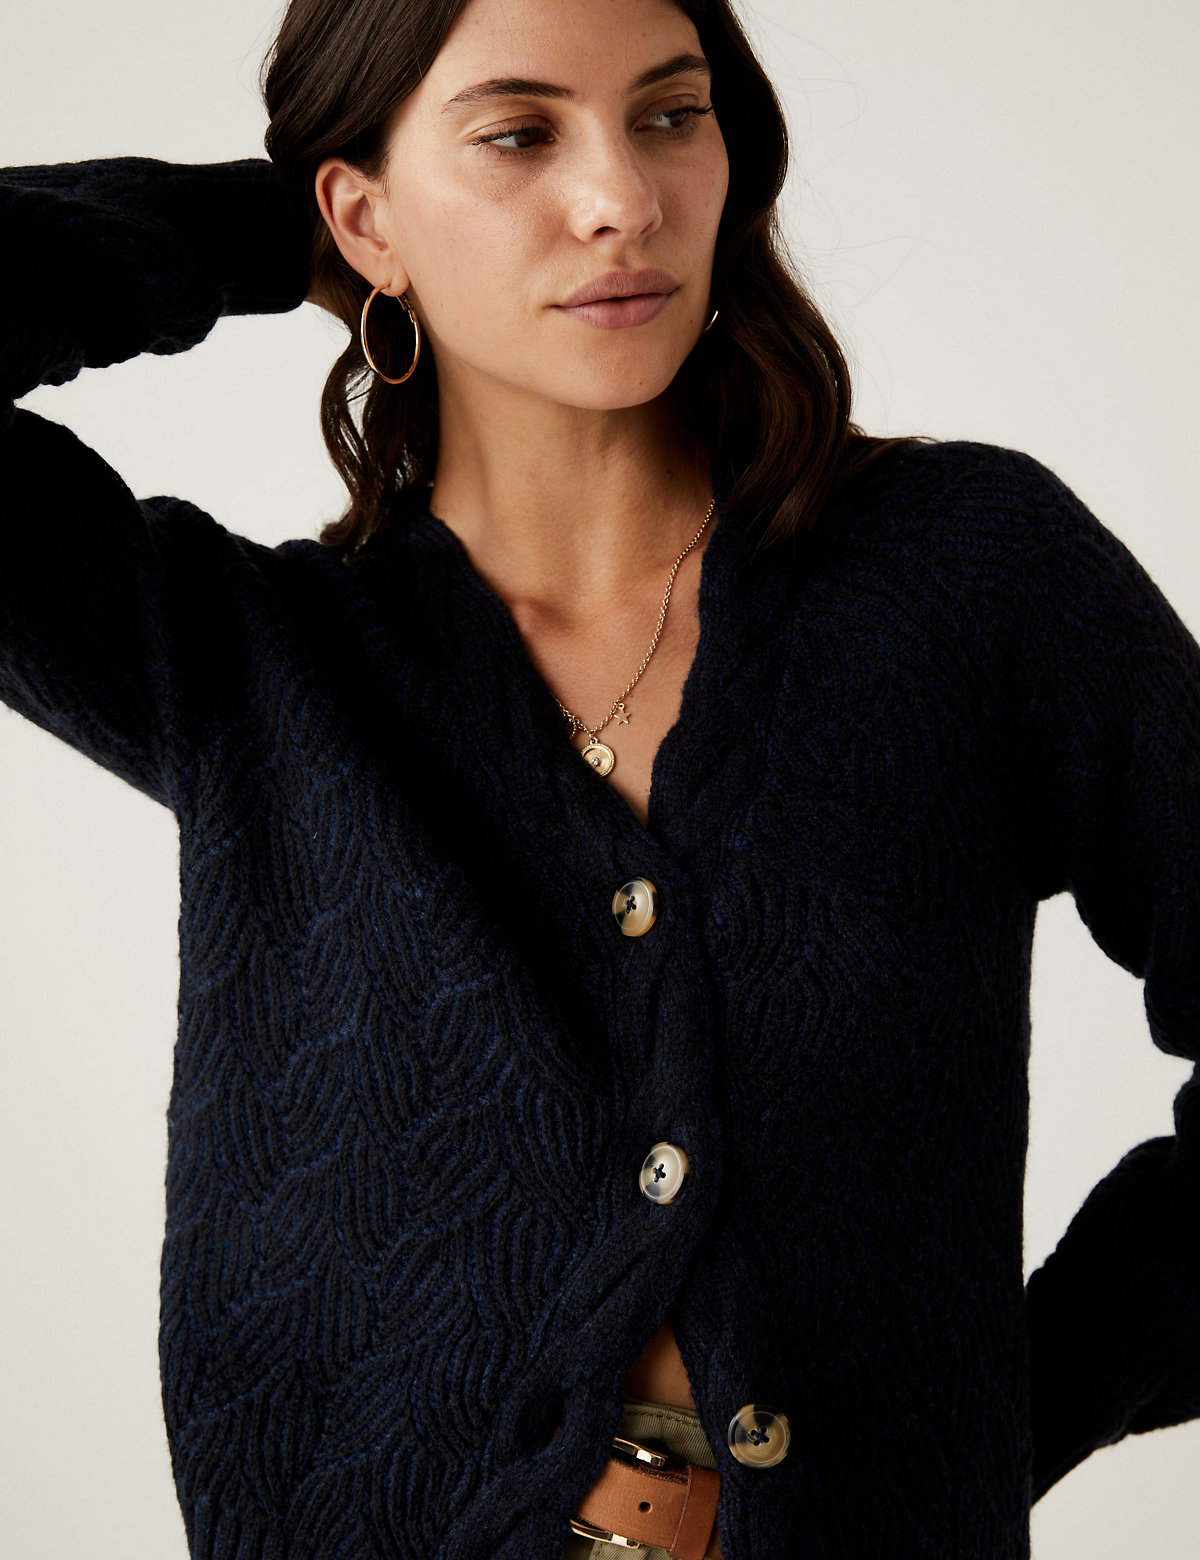 Textured V-Neck Cardigan with Wool